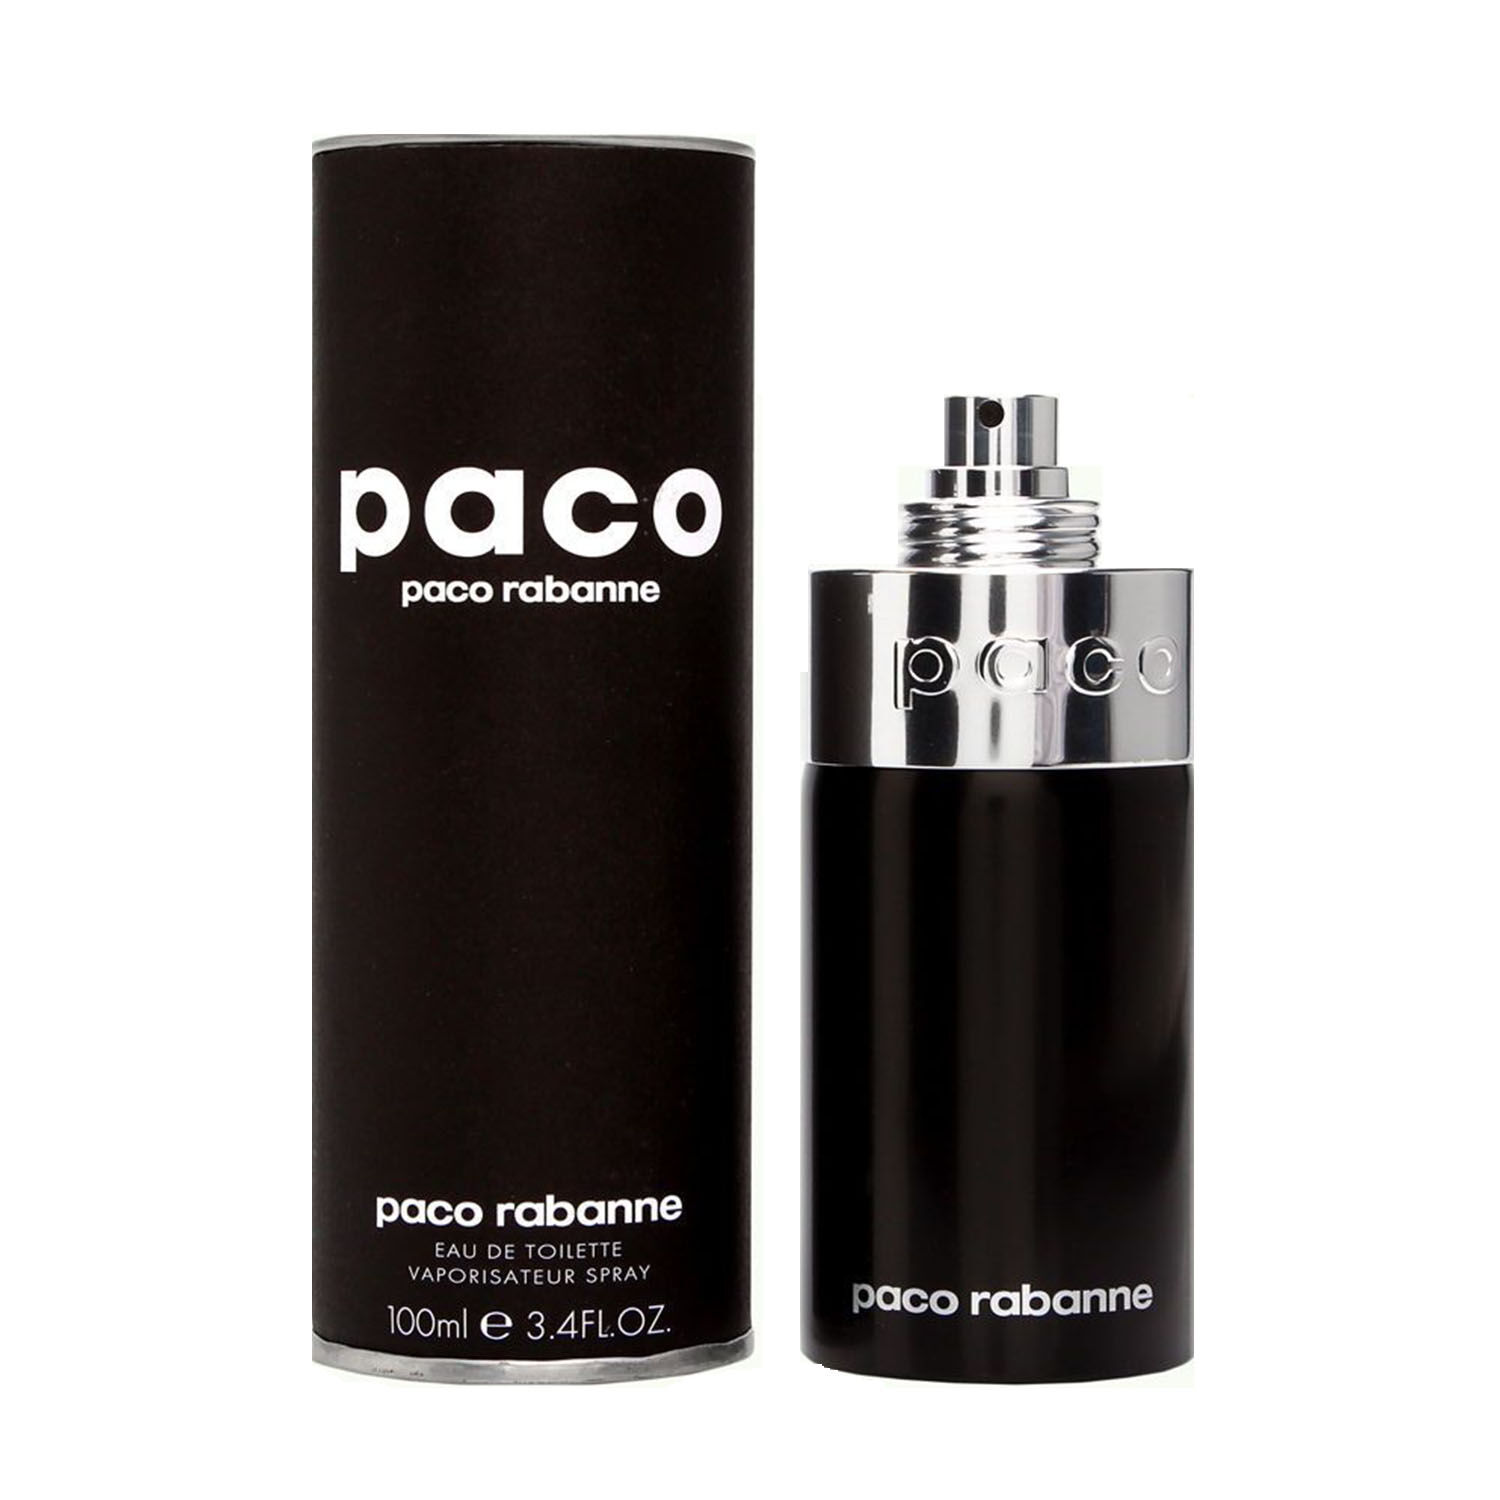 paco rabanne pour homme cologne